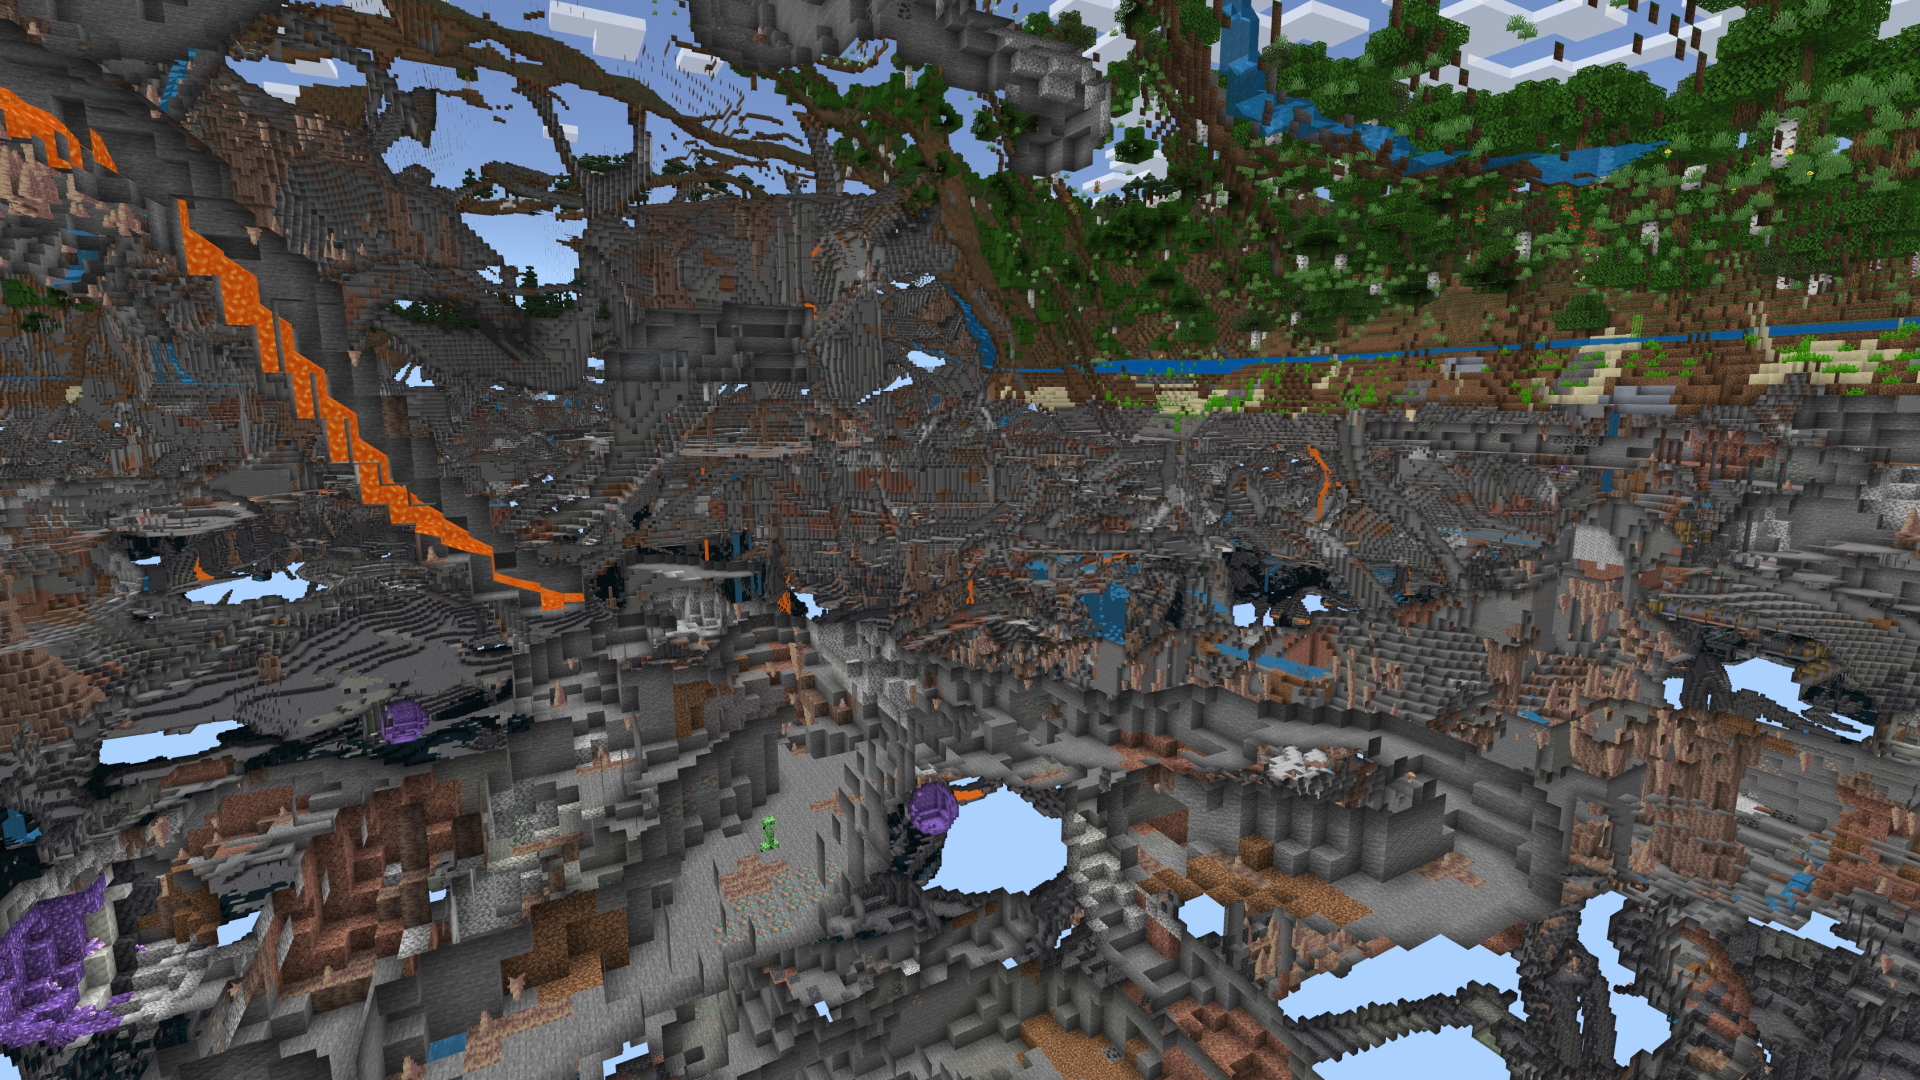 A Minecrfat screenshot showing how the world looks when flying through the terrain using spectator game mode